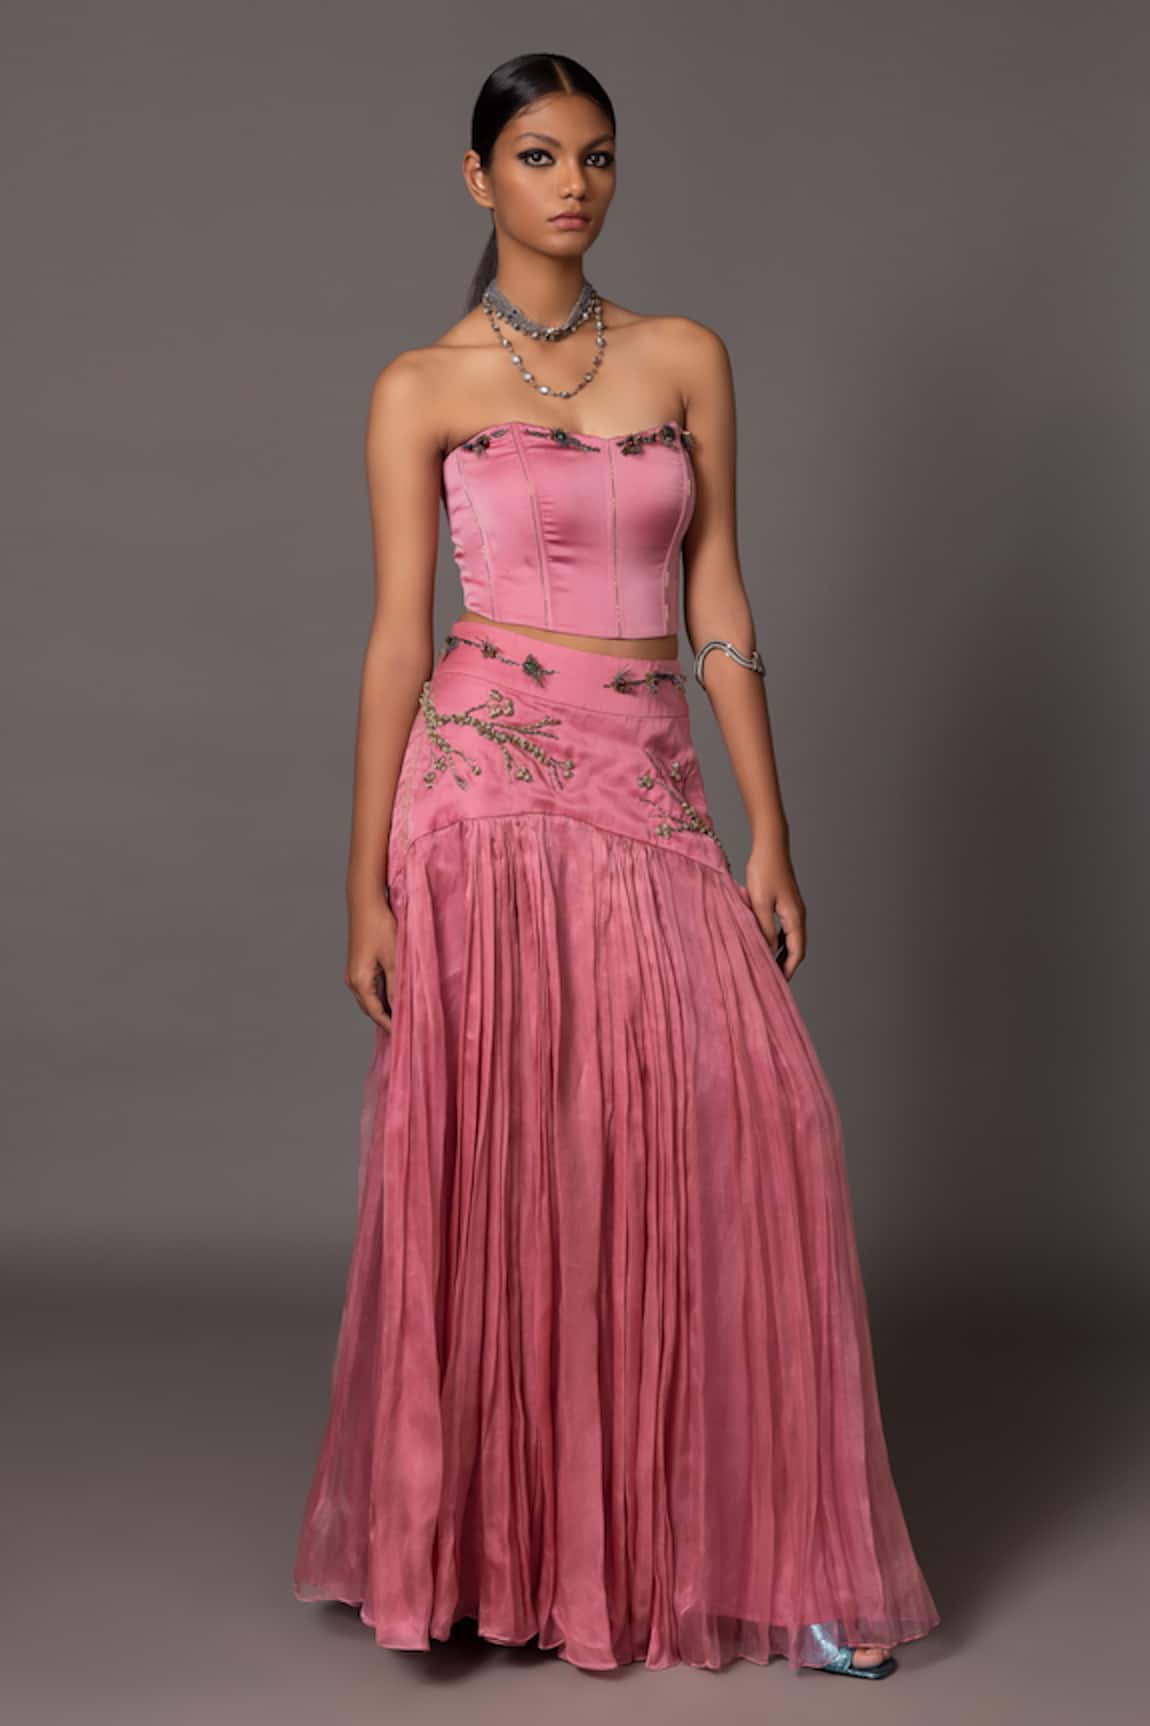 A Humming Way Kaner Metallic Thread Embroidered Skirt With Corset